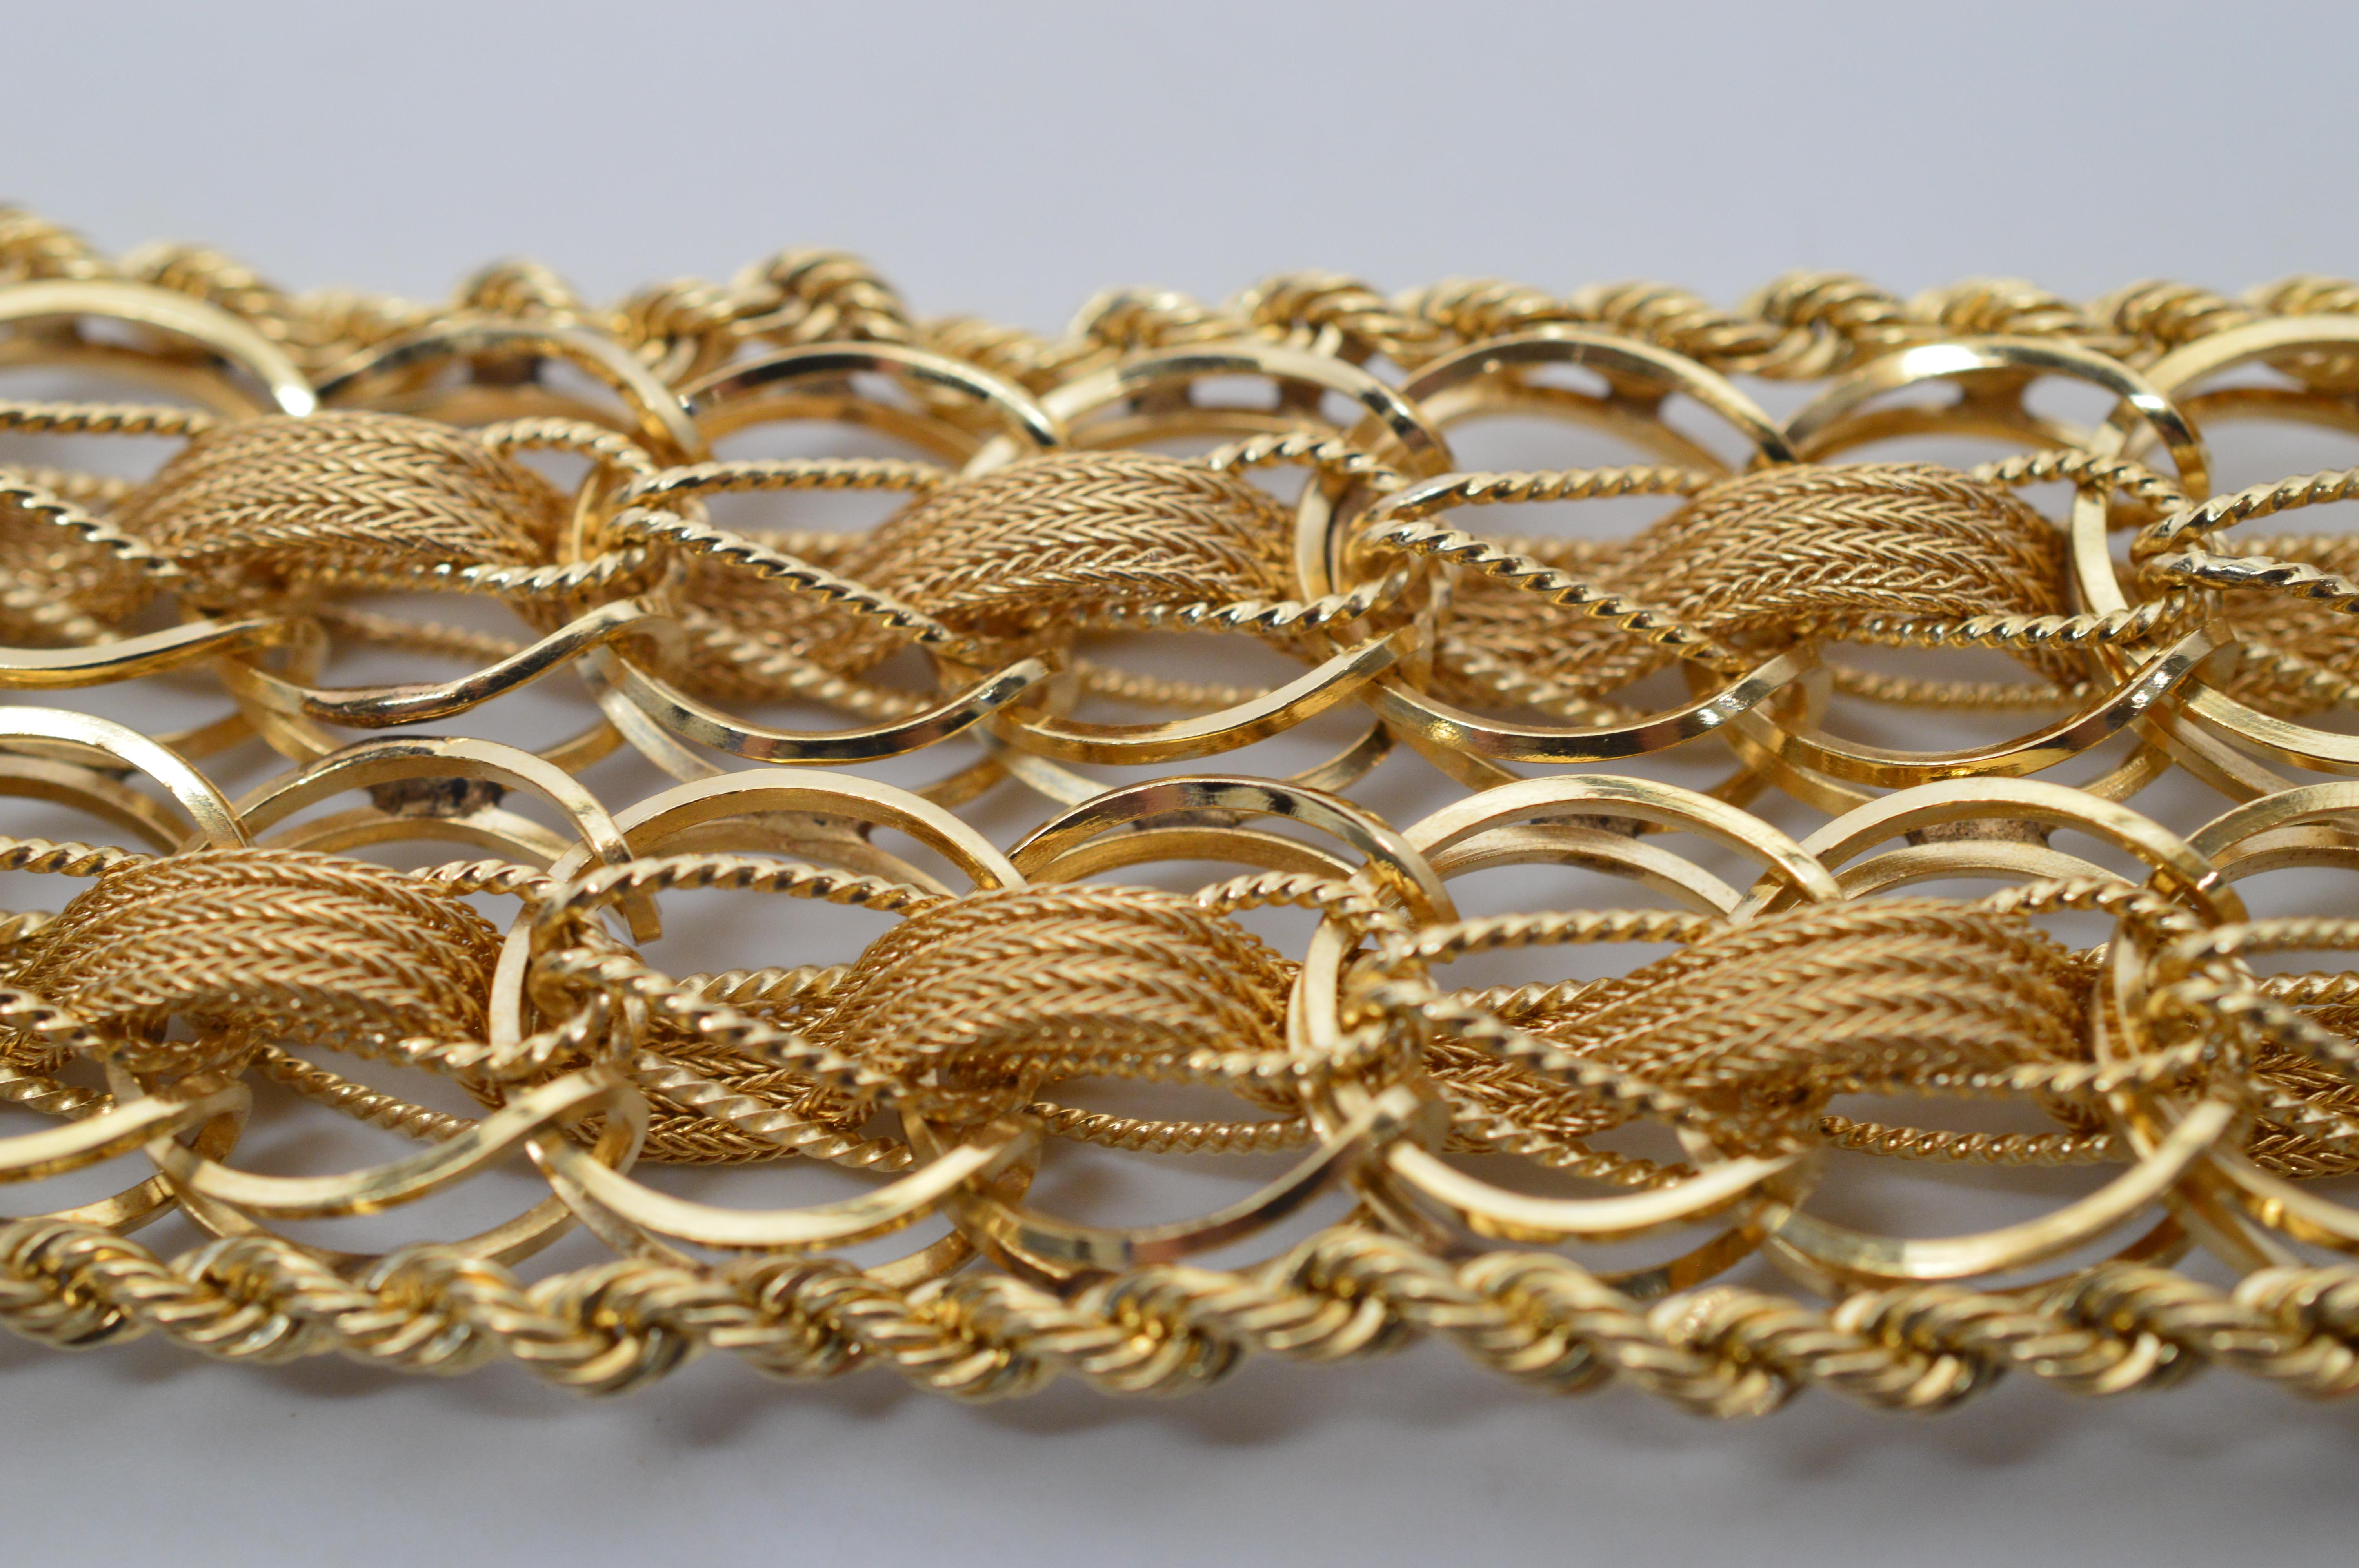 Stunning and beautiful on the wrist are two double rows of bright round fourteen karat 14K yellow gold links are intricately woven with yards of fourteen karat 14K yellow gold wire strands that create this 1-3/8 inch wide flexible bracelet. A